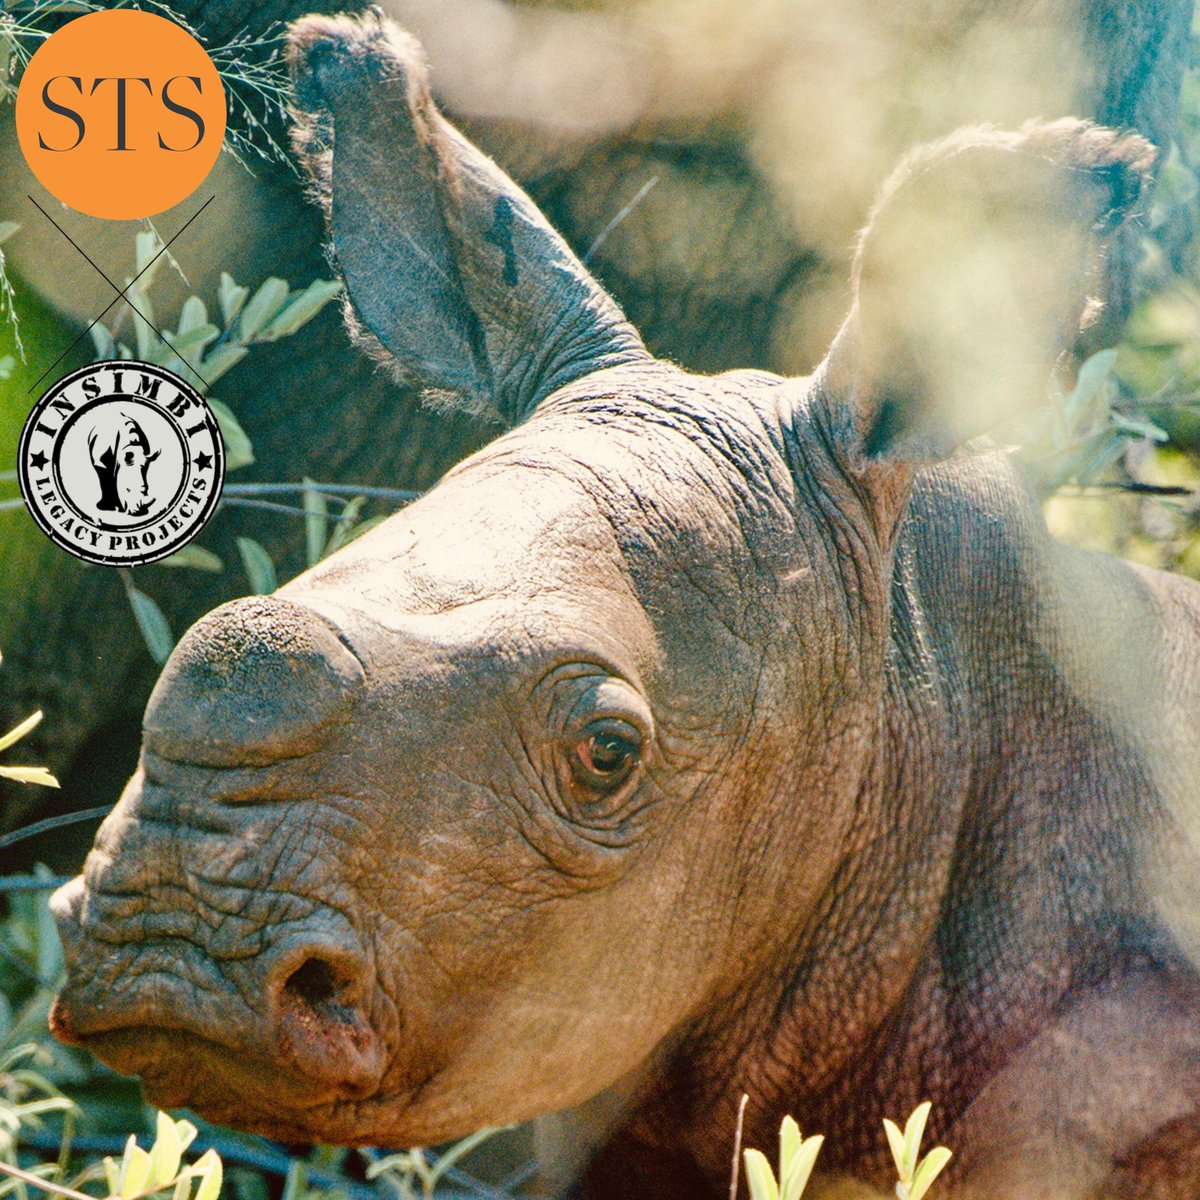 🌿🦏 Exciting news from Insimbi Reserve! A Southern White Rhino calf has been born, symbolising hope & the success of conservation efforts. Thanks to your support, Saving The Survivors has provided vital care, anti-poaching efforts, & more. This victory is yours too! 🎉